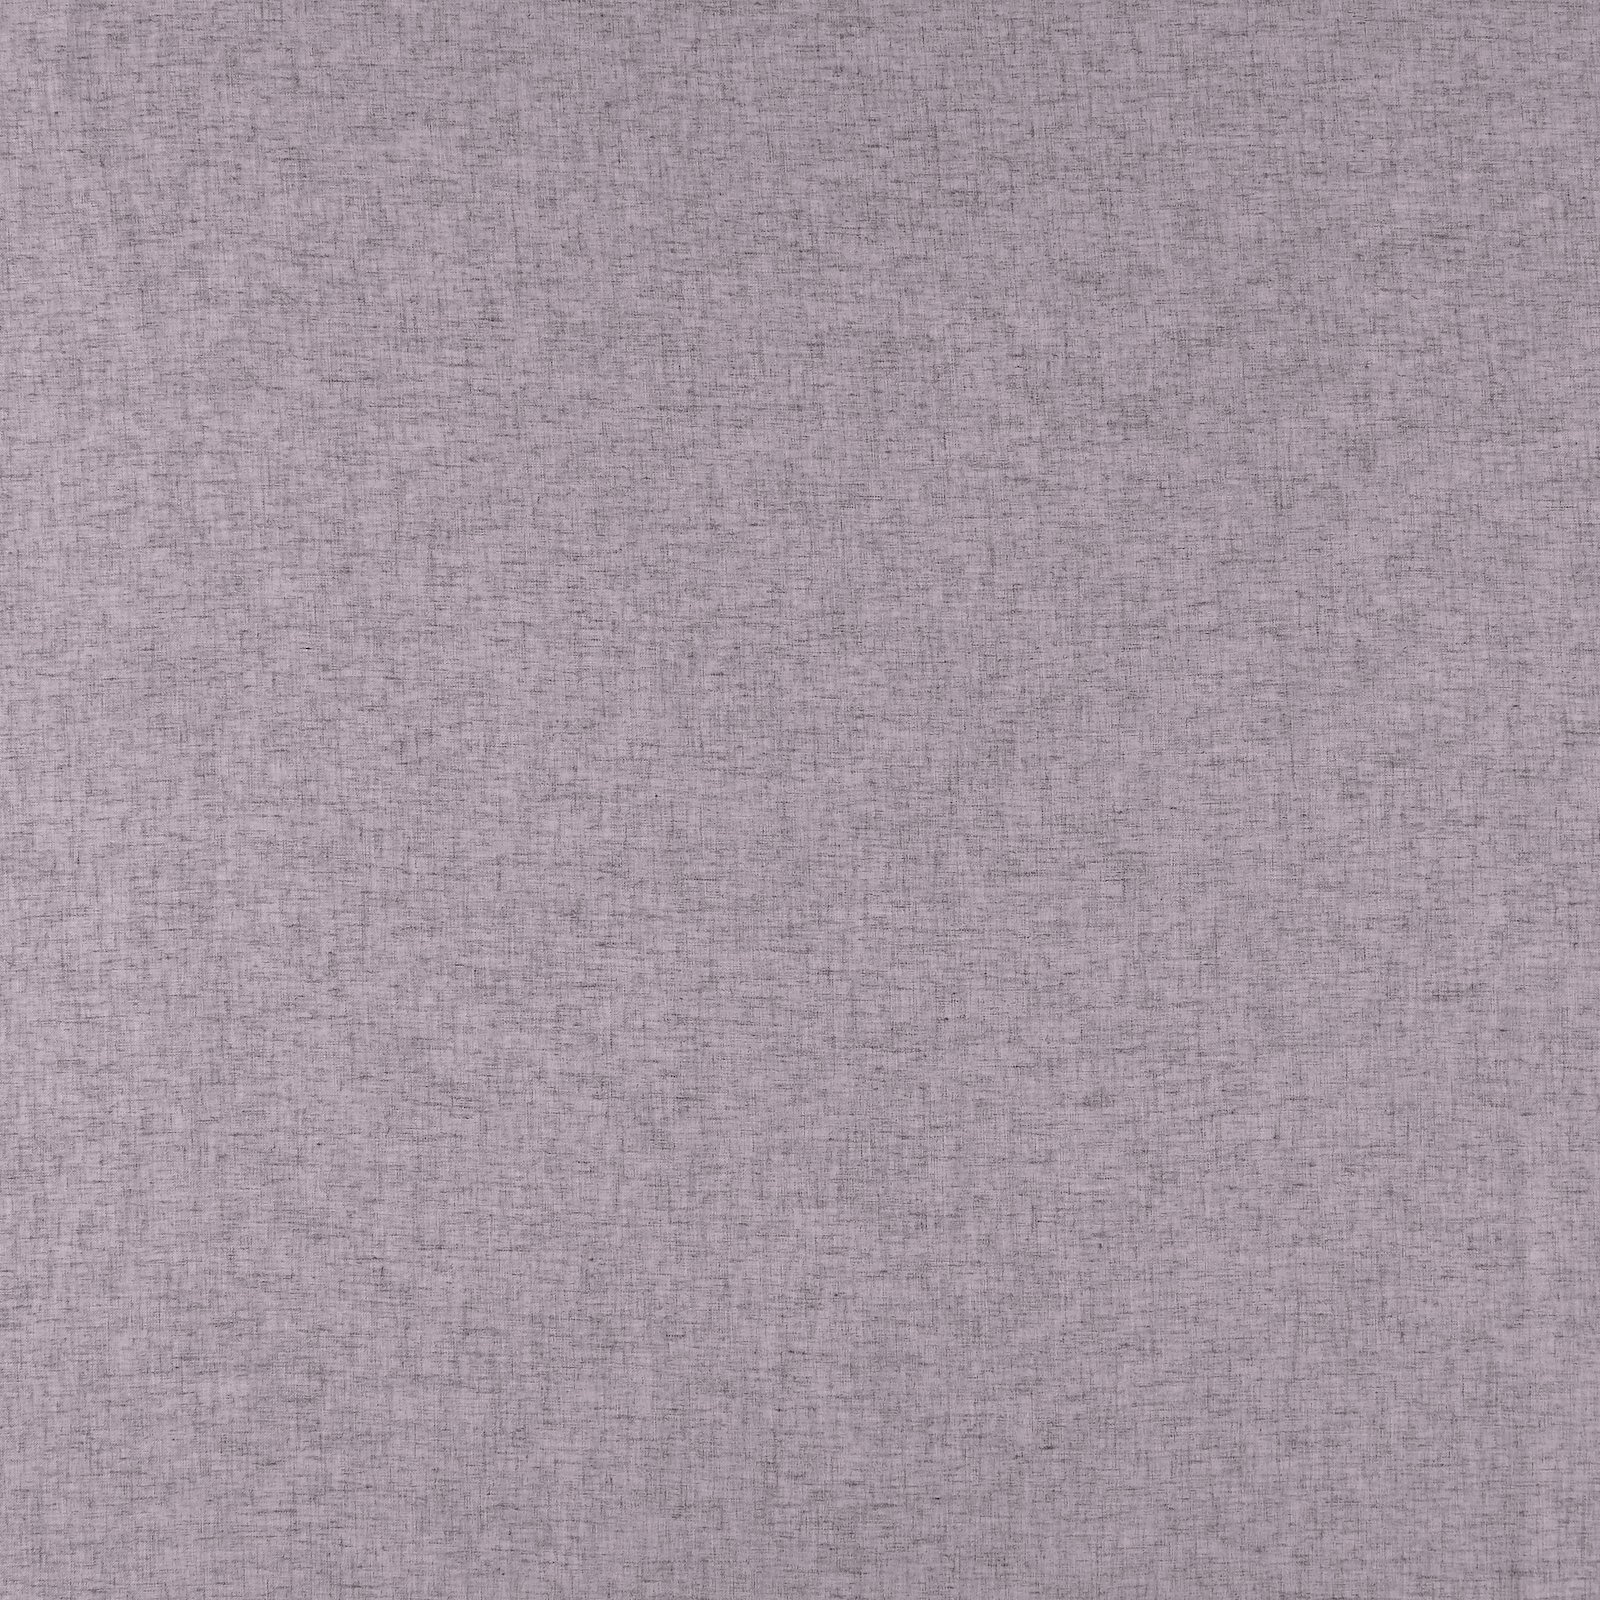 Voile dark dusty purple polyester/linen blend 835184_pack_solid